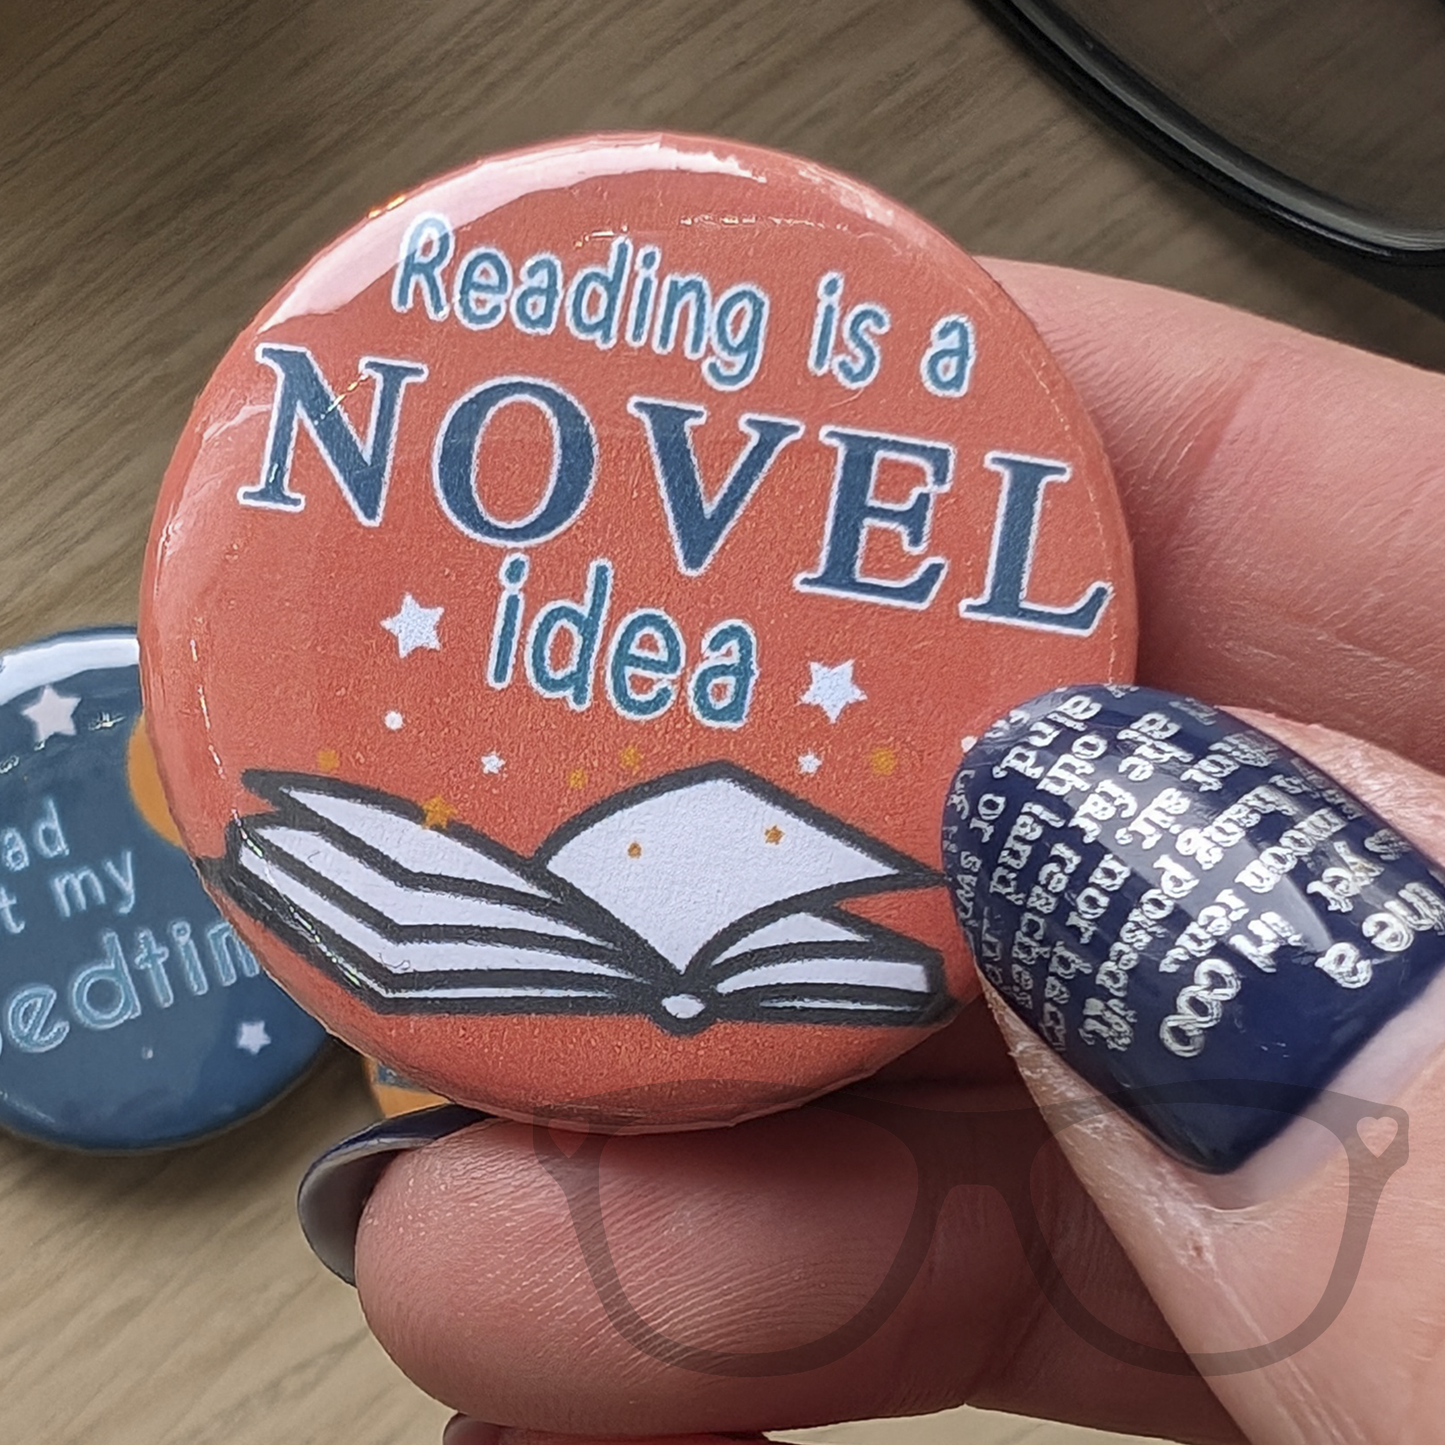 Reading is a novel idea, orange badge with green text and an open book graphic